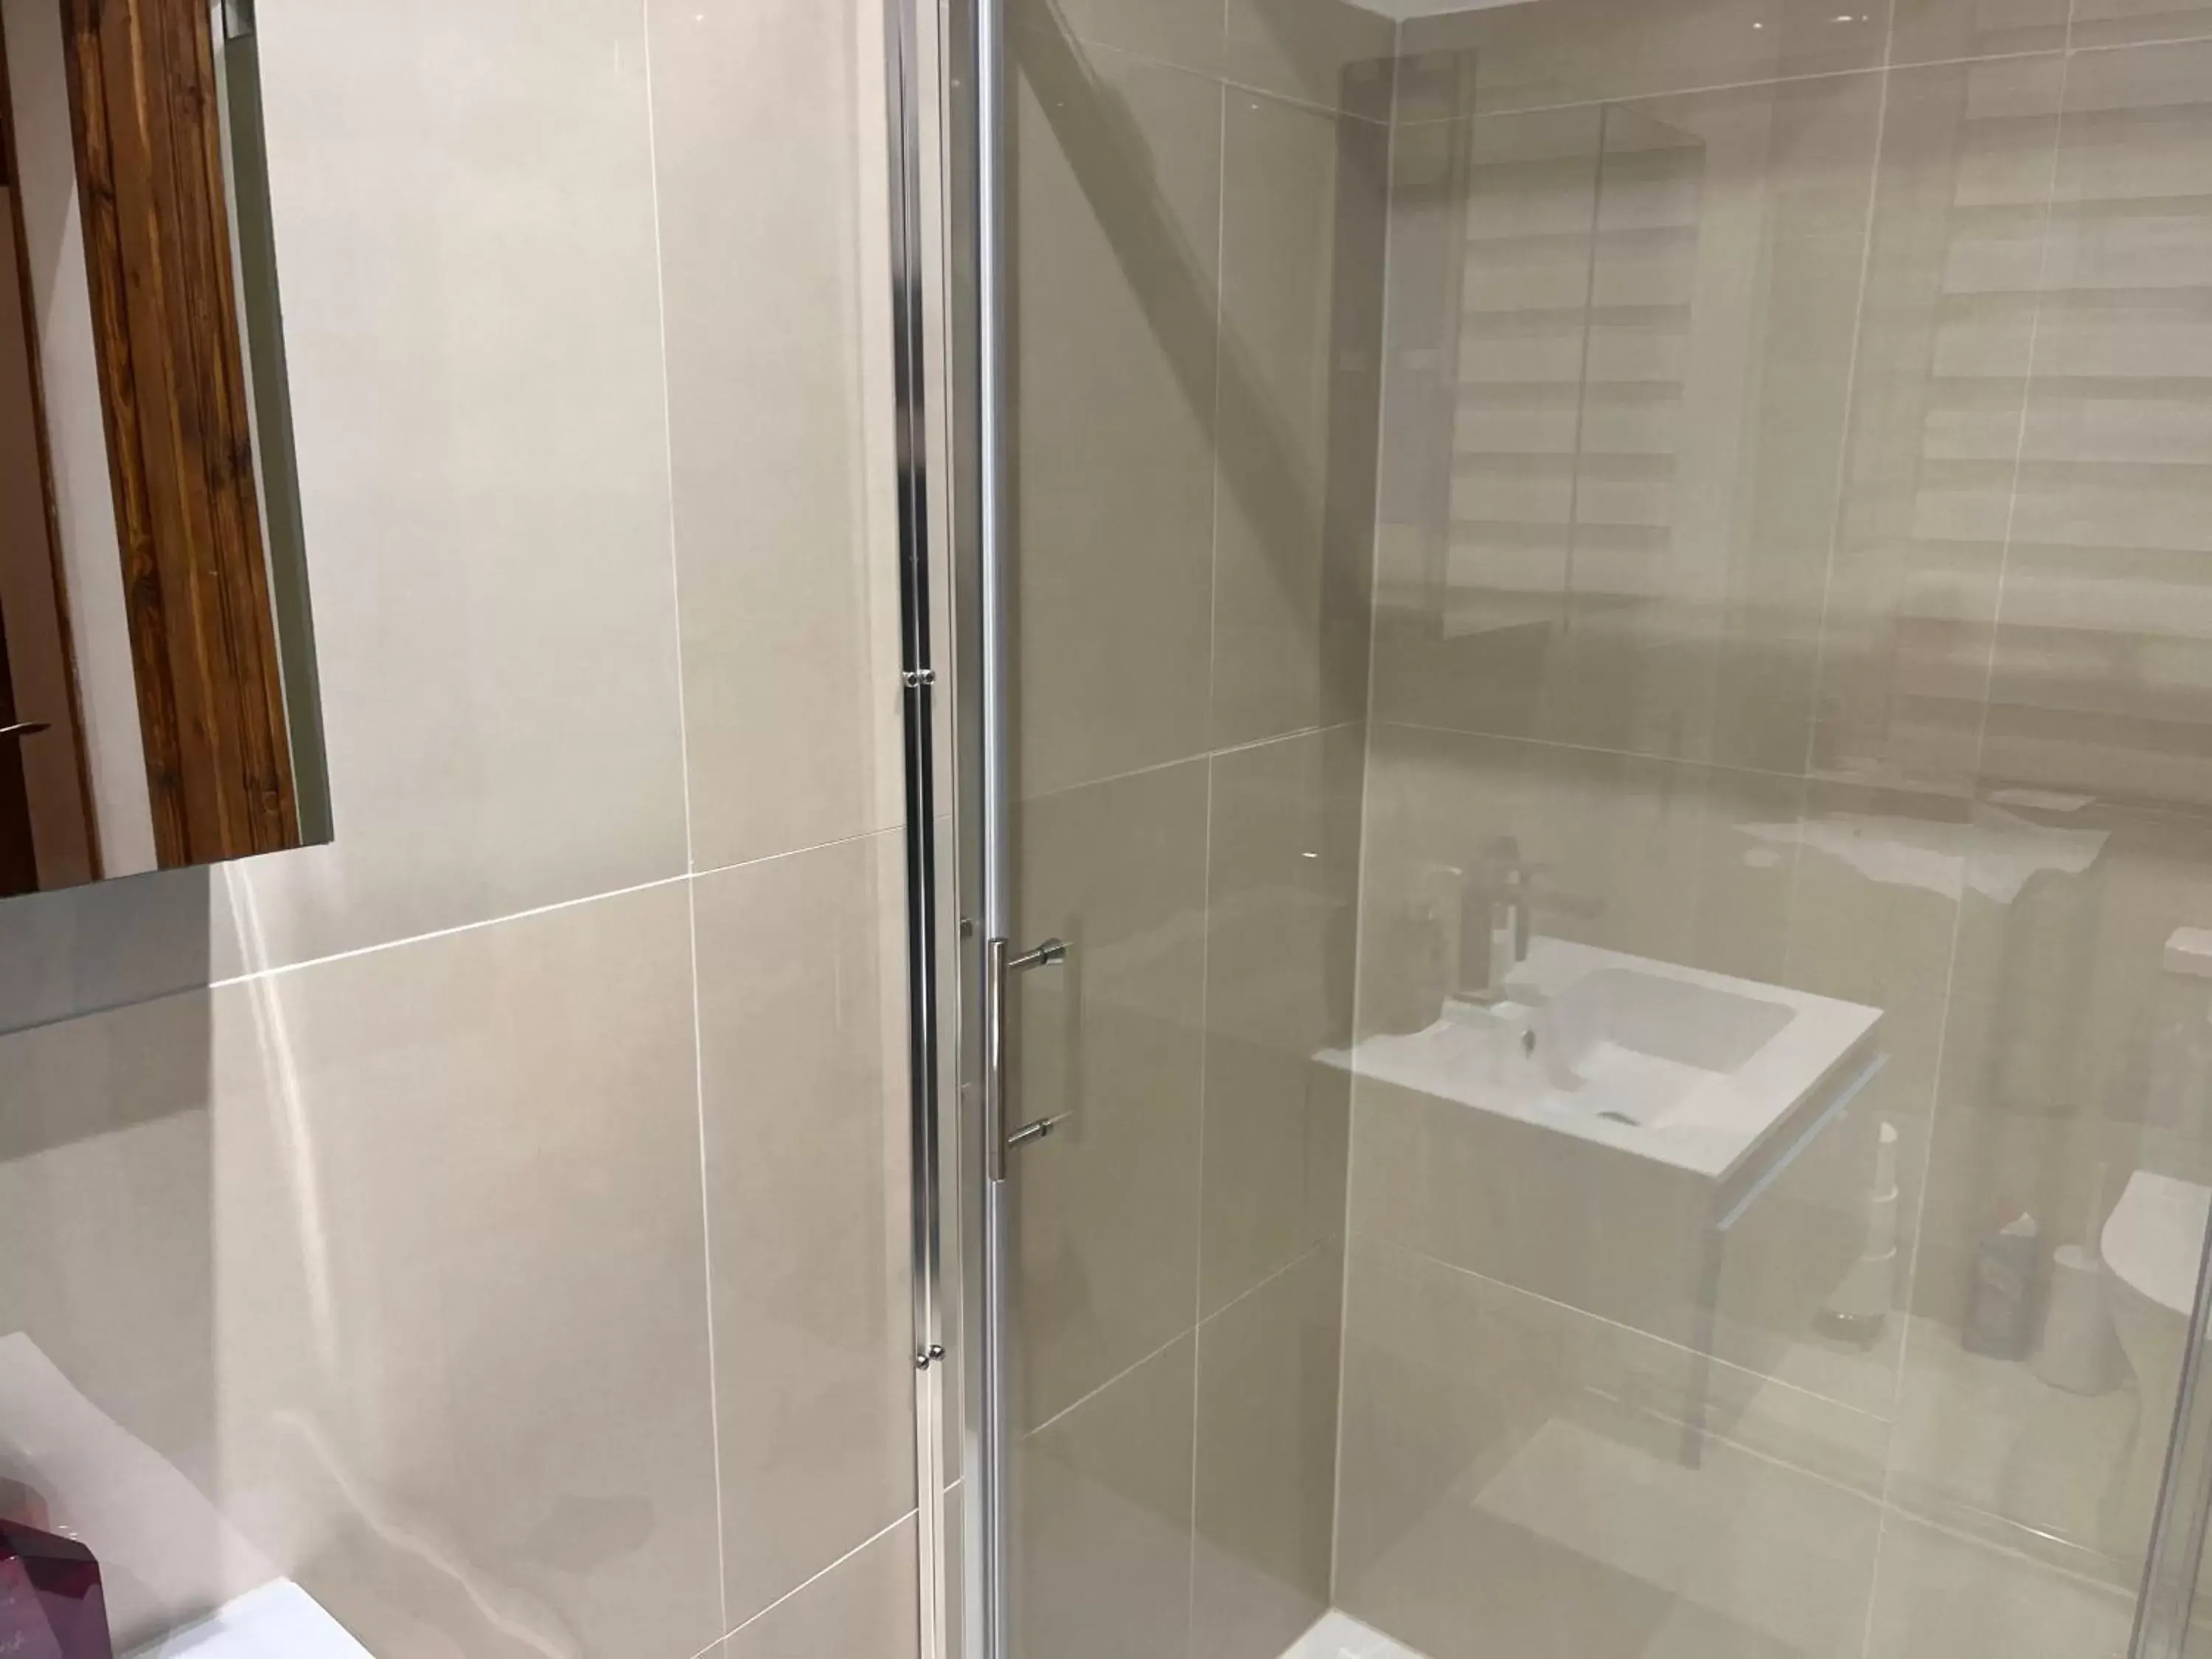 Bathroom in TJ Homes - Luxury Studio Suite with Garden View - Next to tube station London